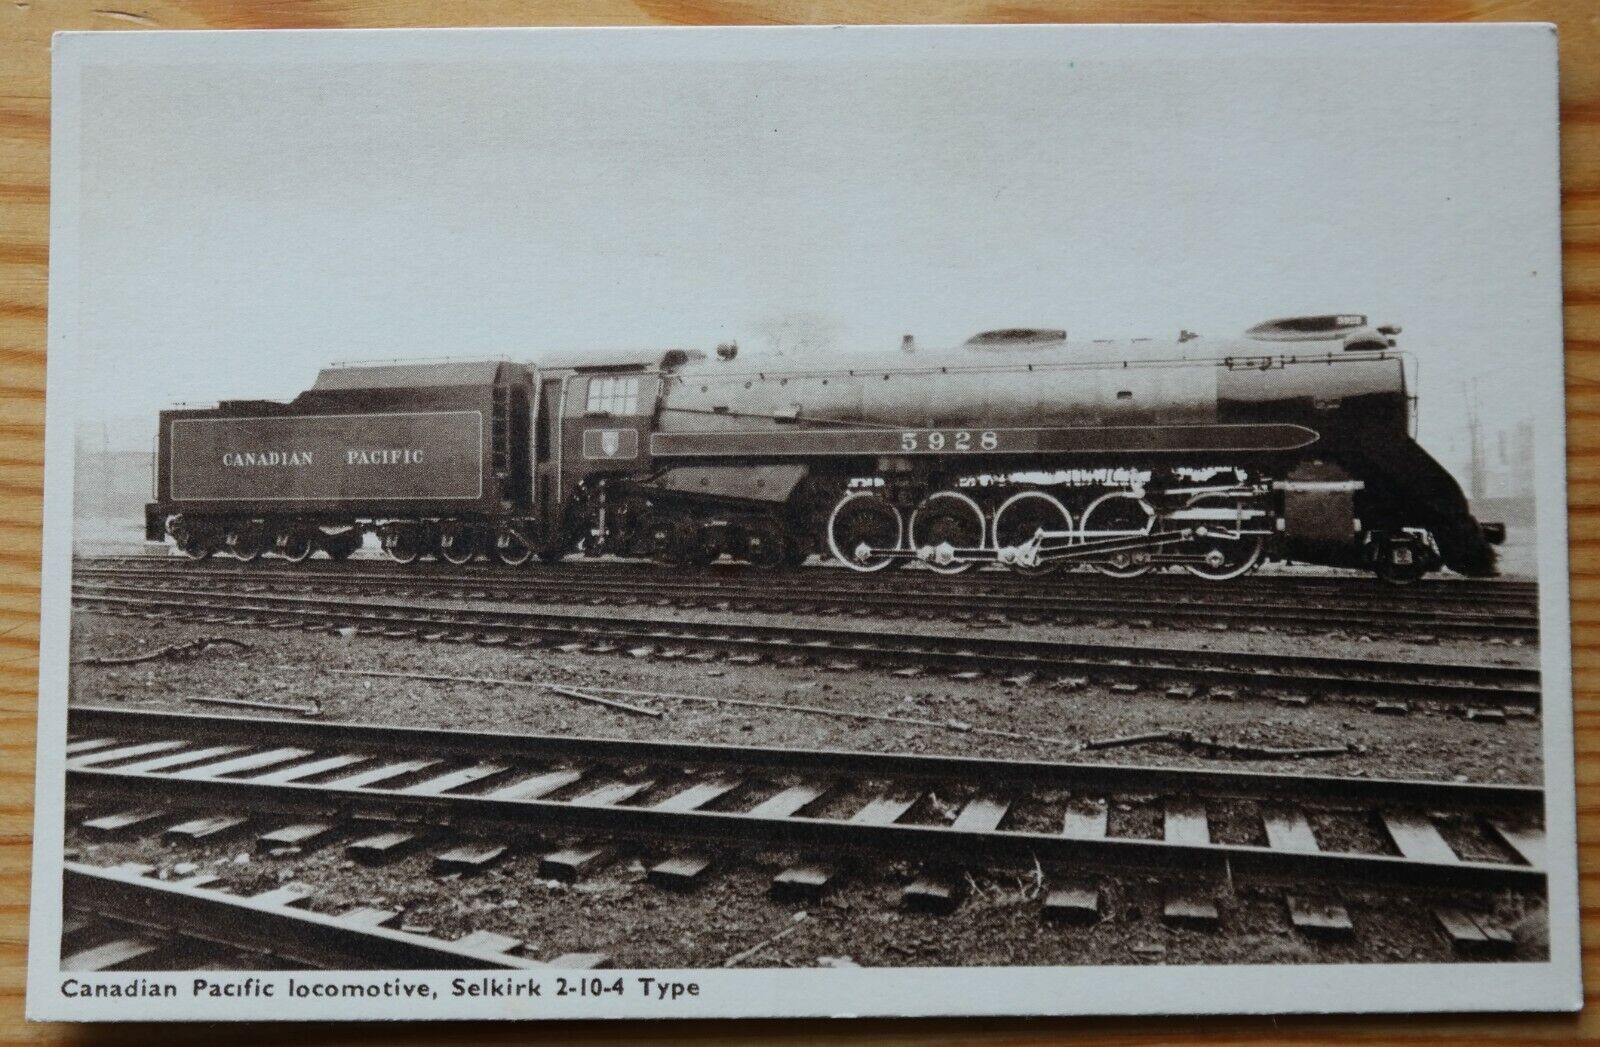 House Clearance - VINTAGE POSTCARD - CANADIAN PACIFIC LOCOMOTIVE "SELKIRK" 2-10-4 type.